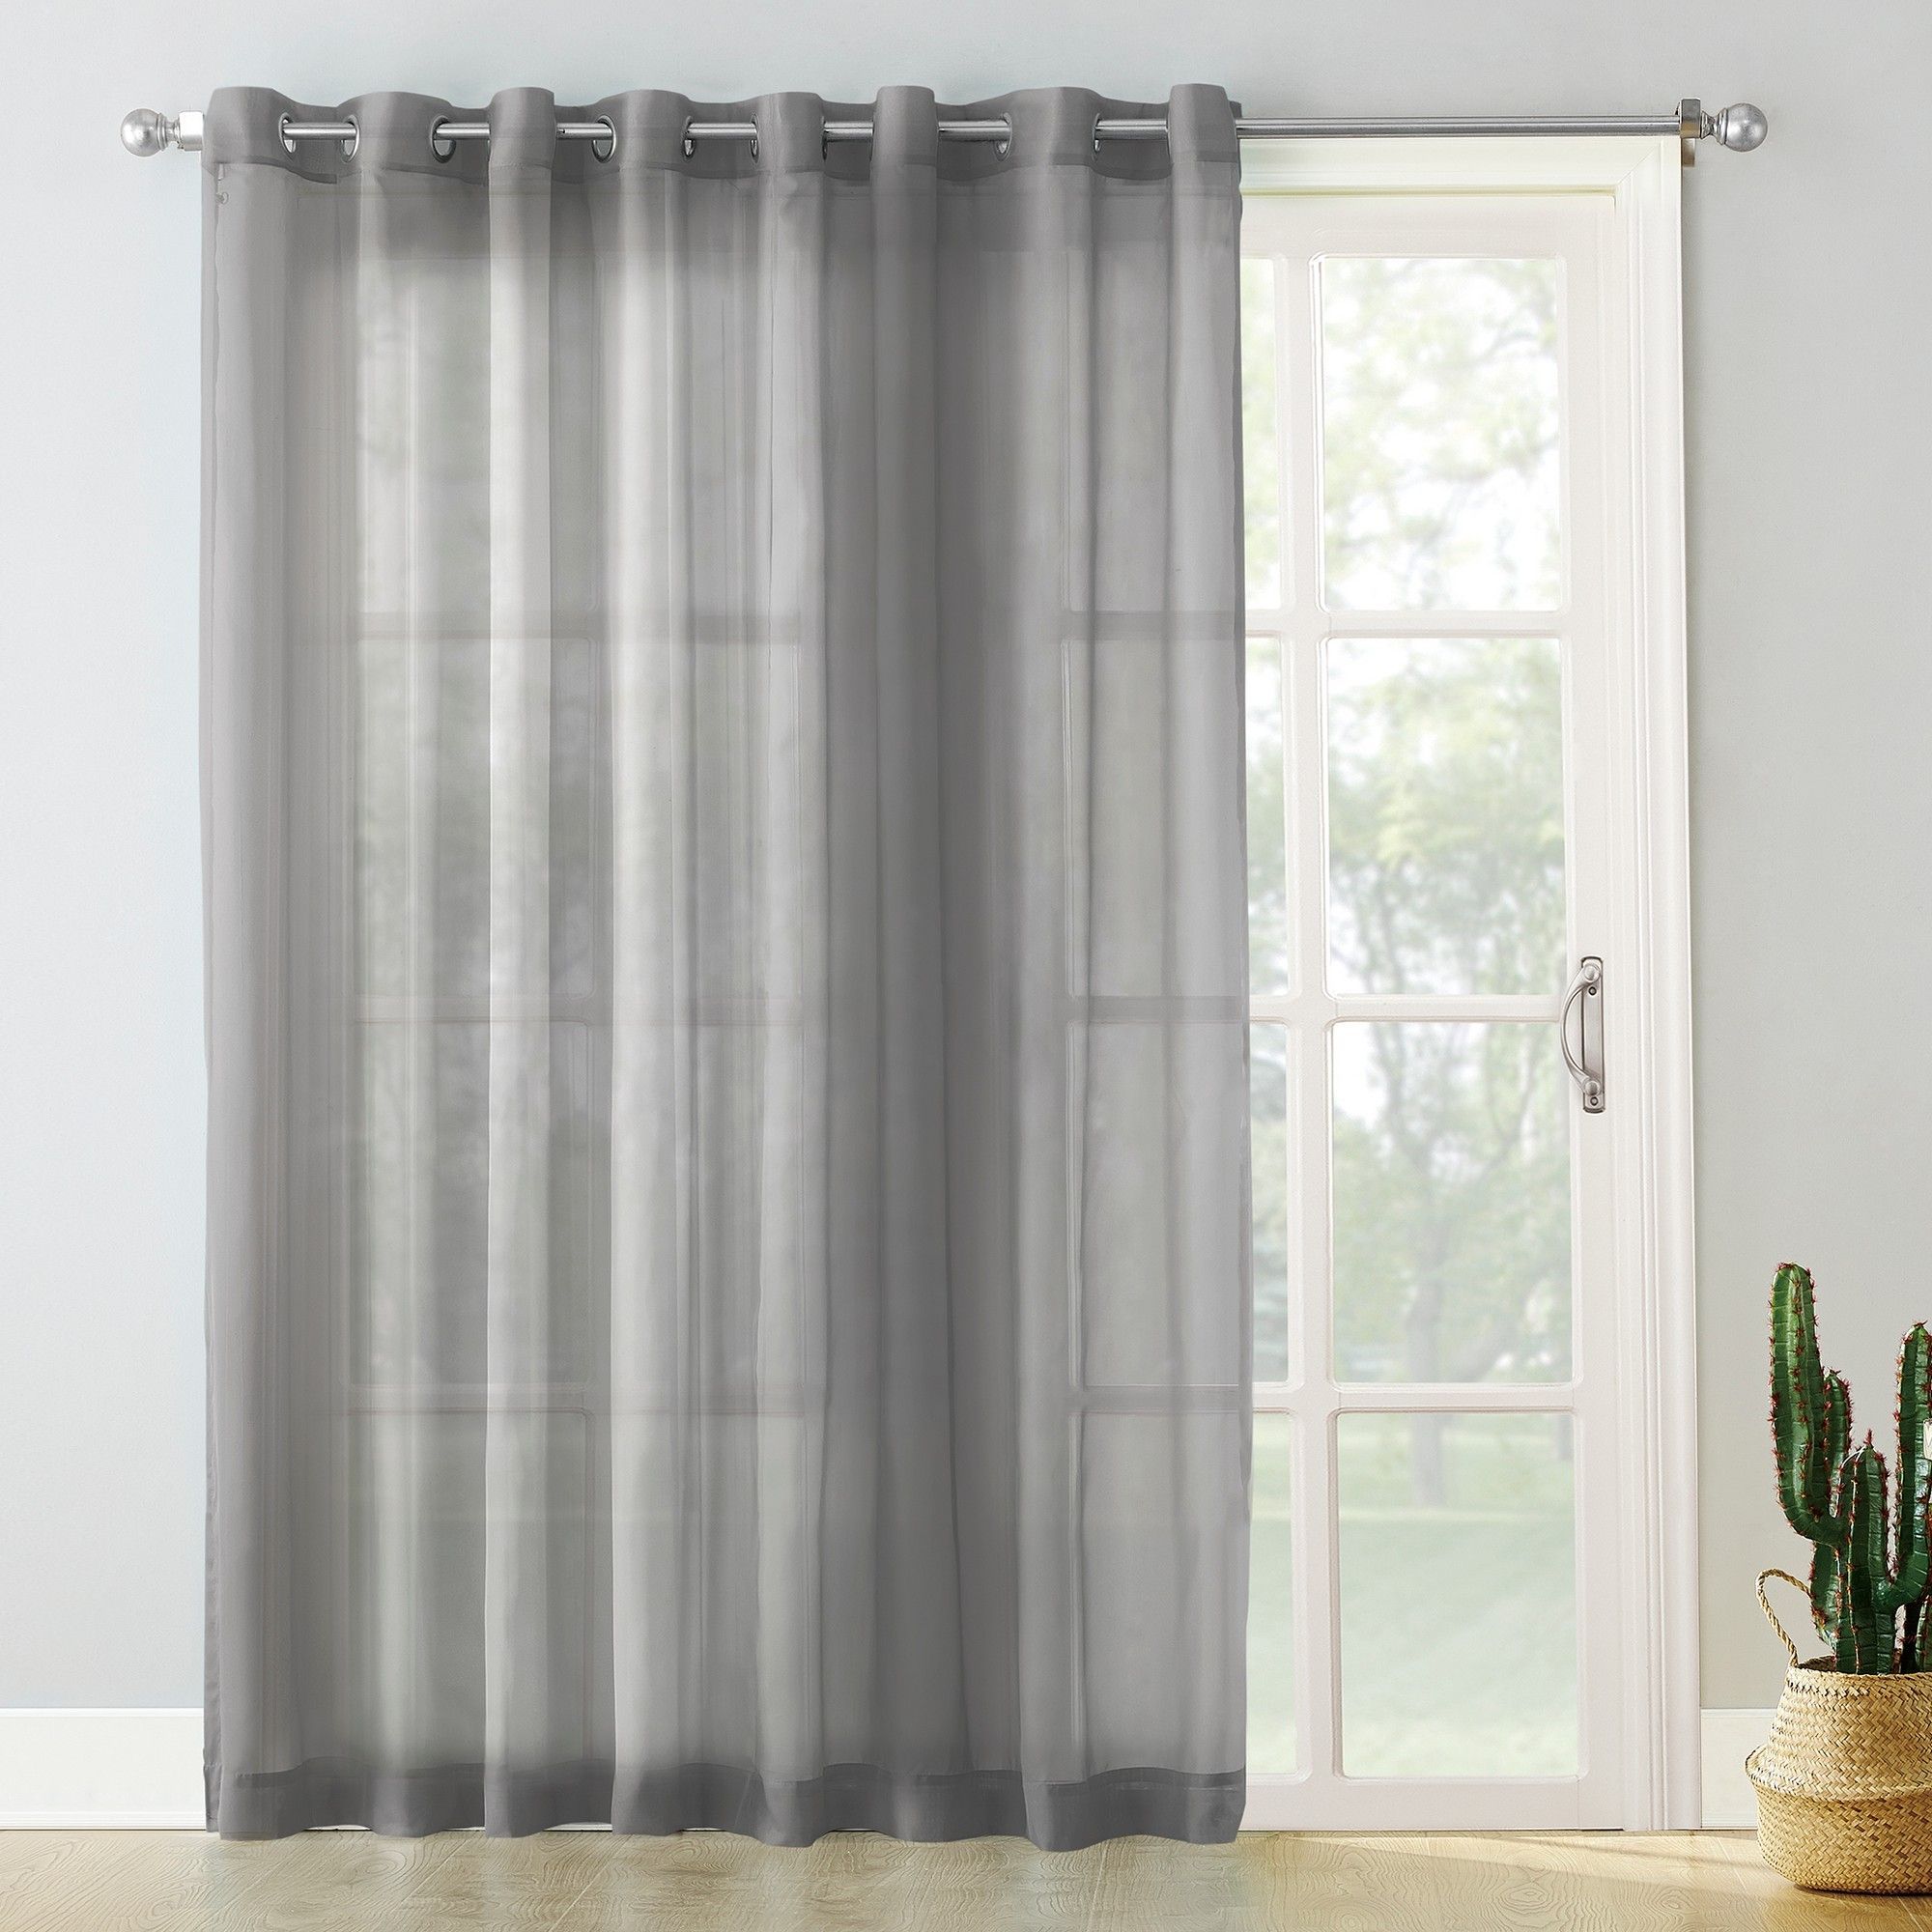 Emily Extra Wide Sheer Voile Sliding Door Patio Curtain Within Extra Wide White Voile Sheer Curtain Panels (View 16 of 20)